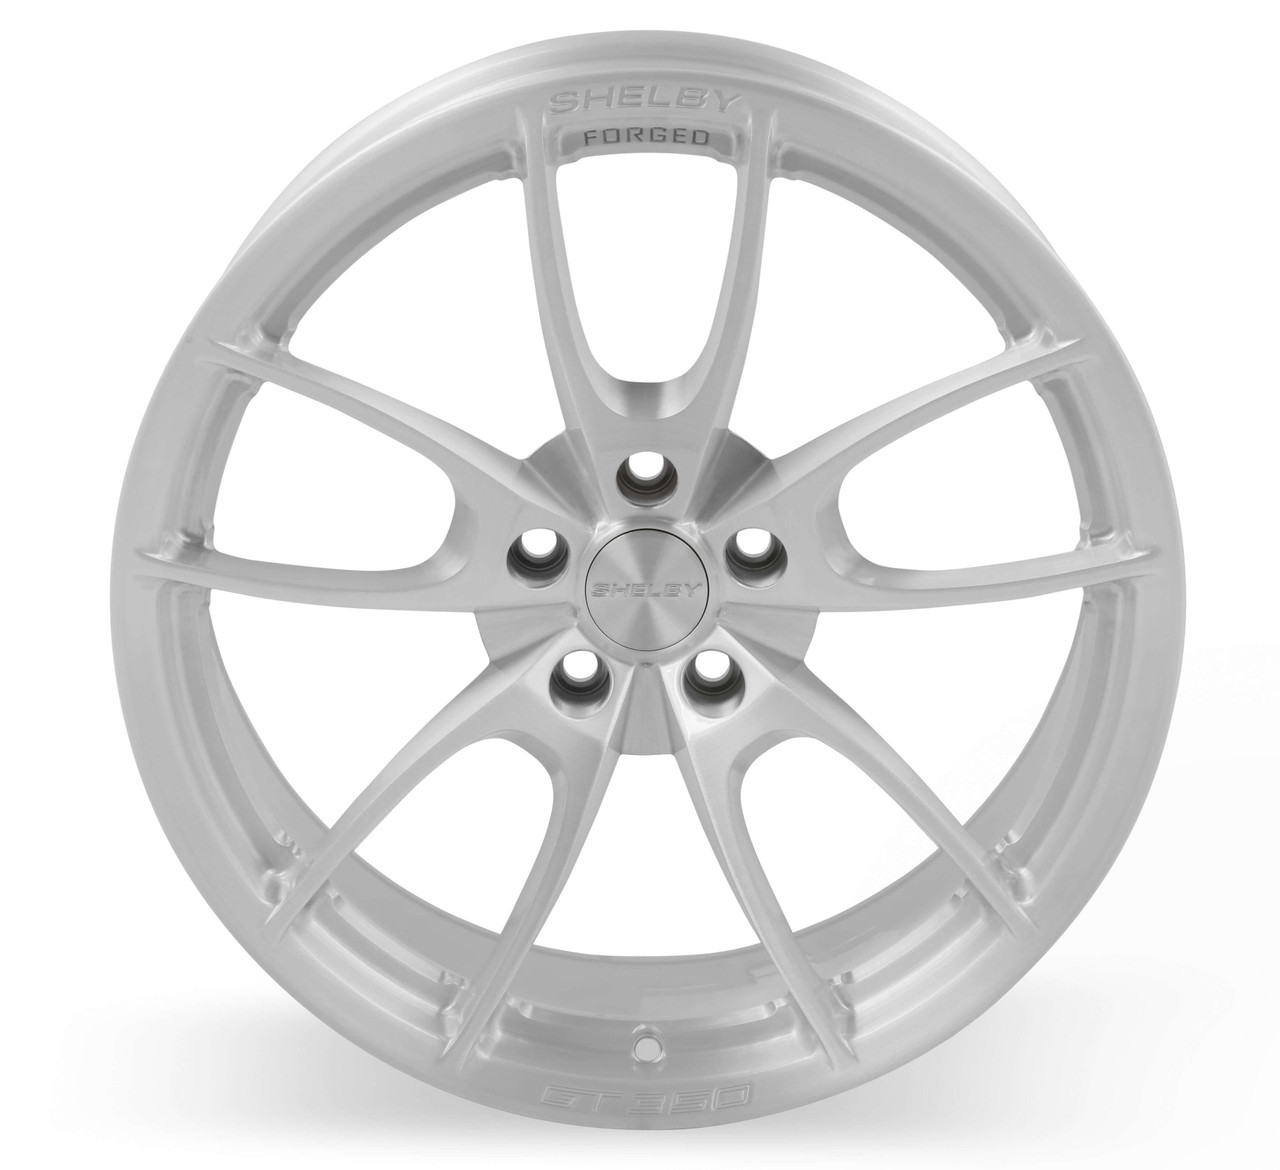 CS21-905430-R Carroll Shelby Wheels 19x10.5 in 5x114.3 30mm Offset Brushed Clear